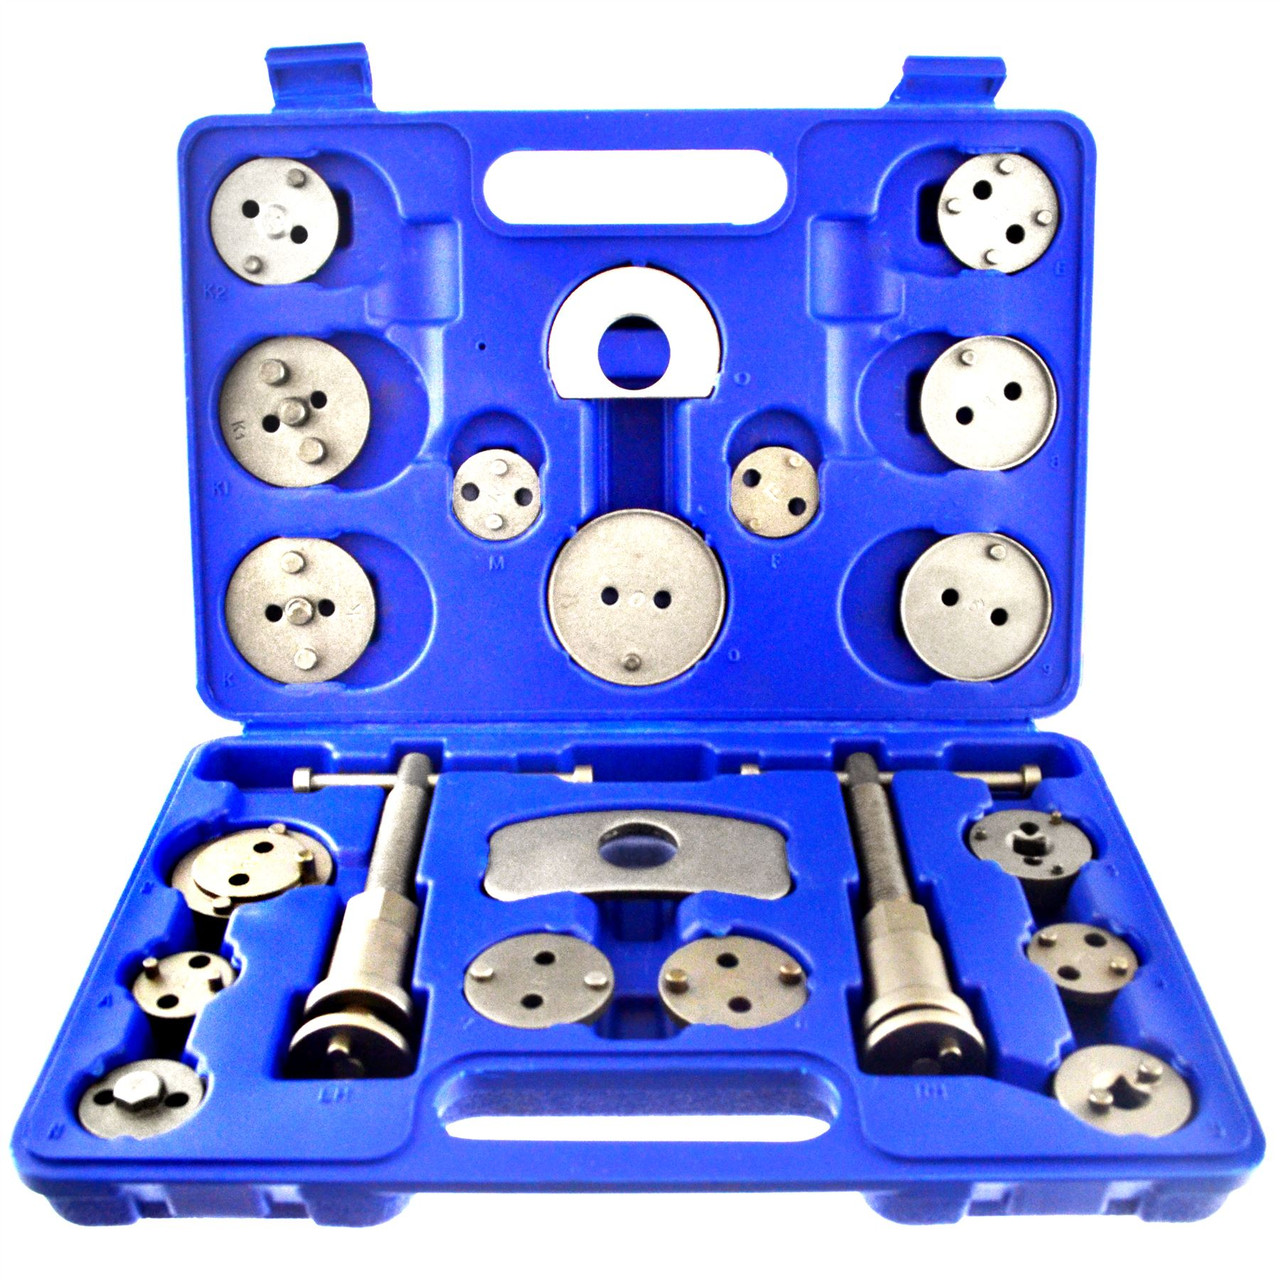 21pc Left and Right Hand Brake Calliper Piston Wind Back Tool Kit AU019 -  AB Tools Online